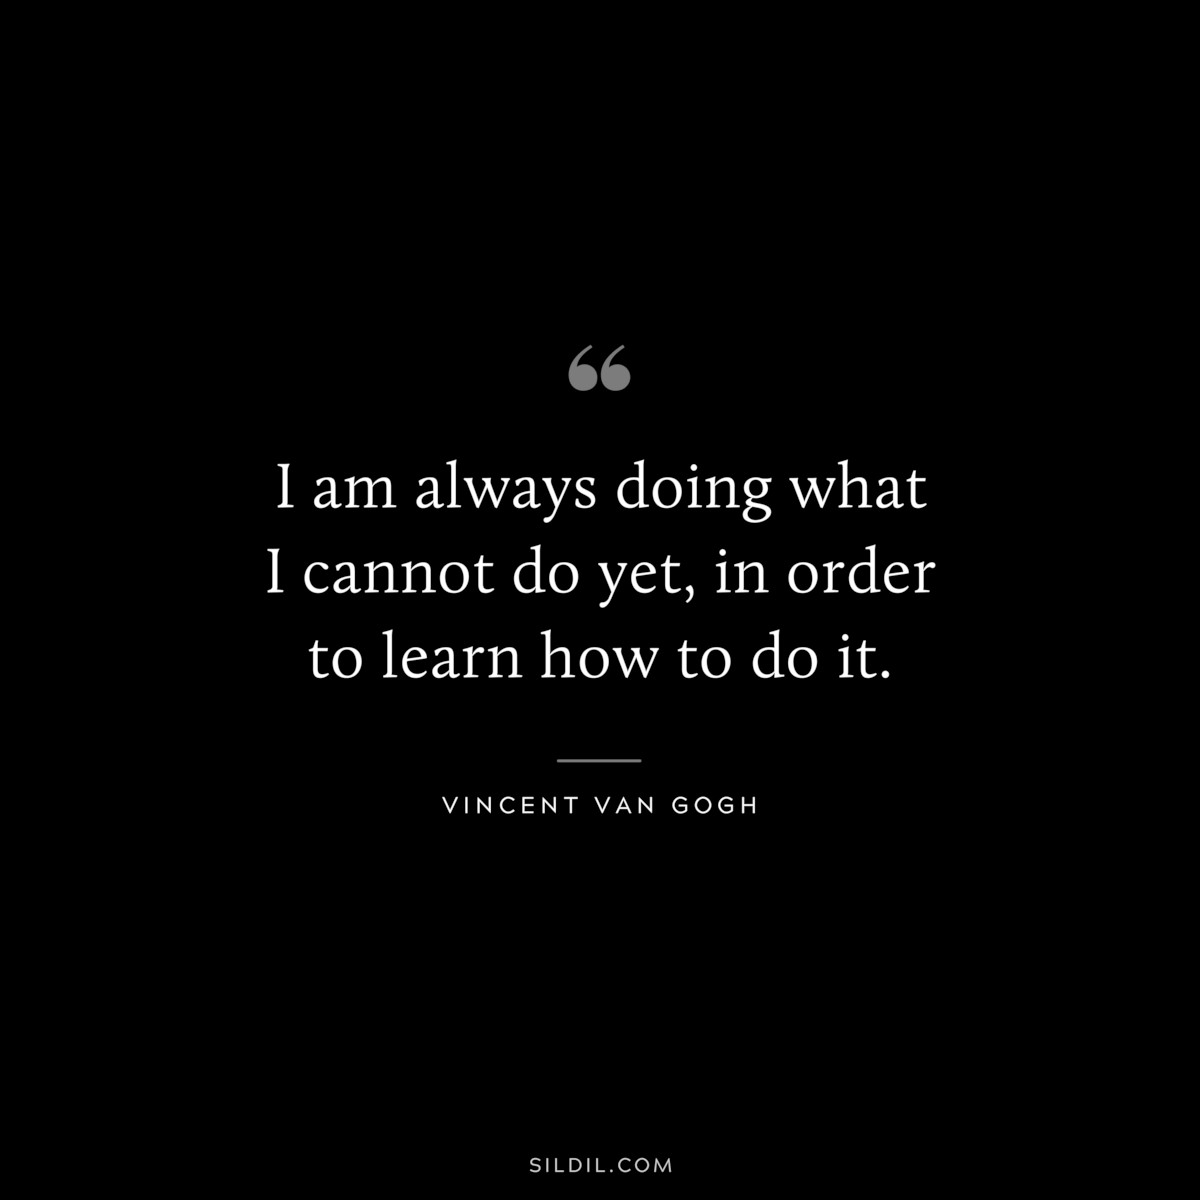 I am always doing what I cannot do yet, in order to learn how to do it. ― Vincent van Gogh